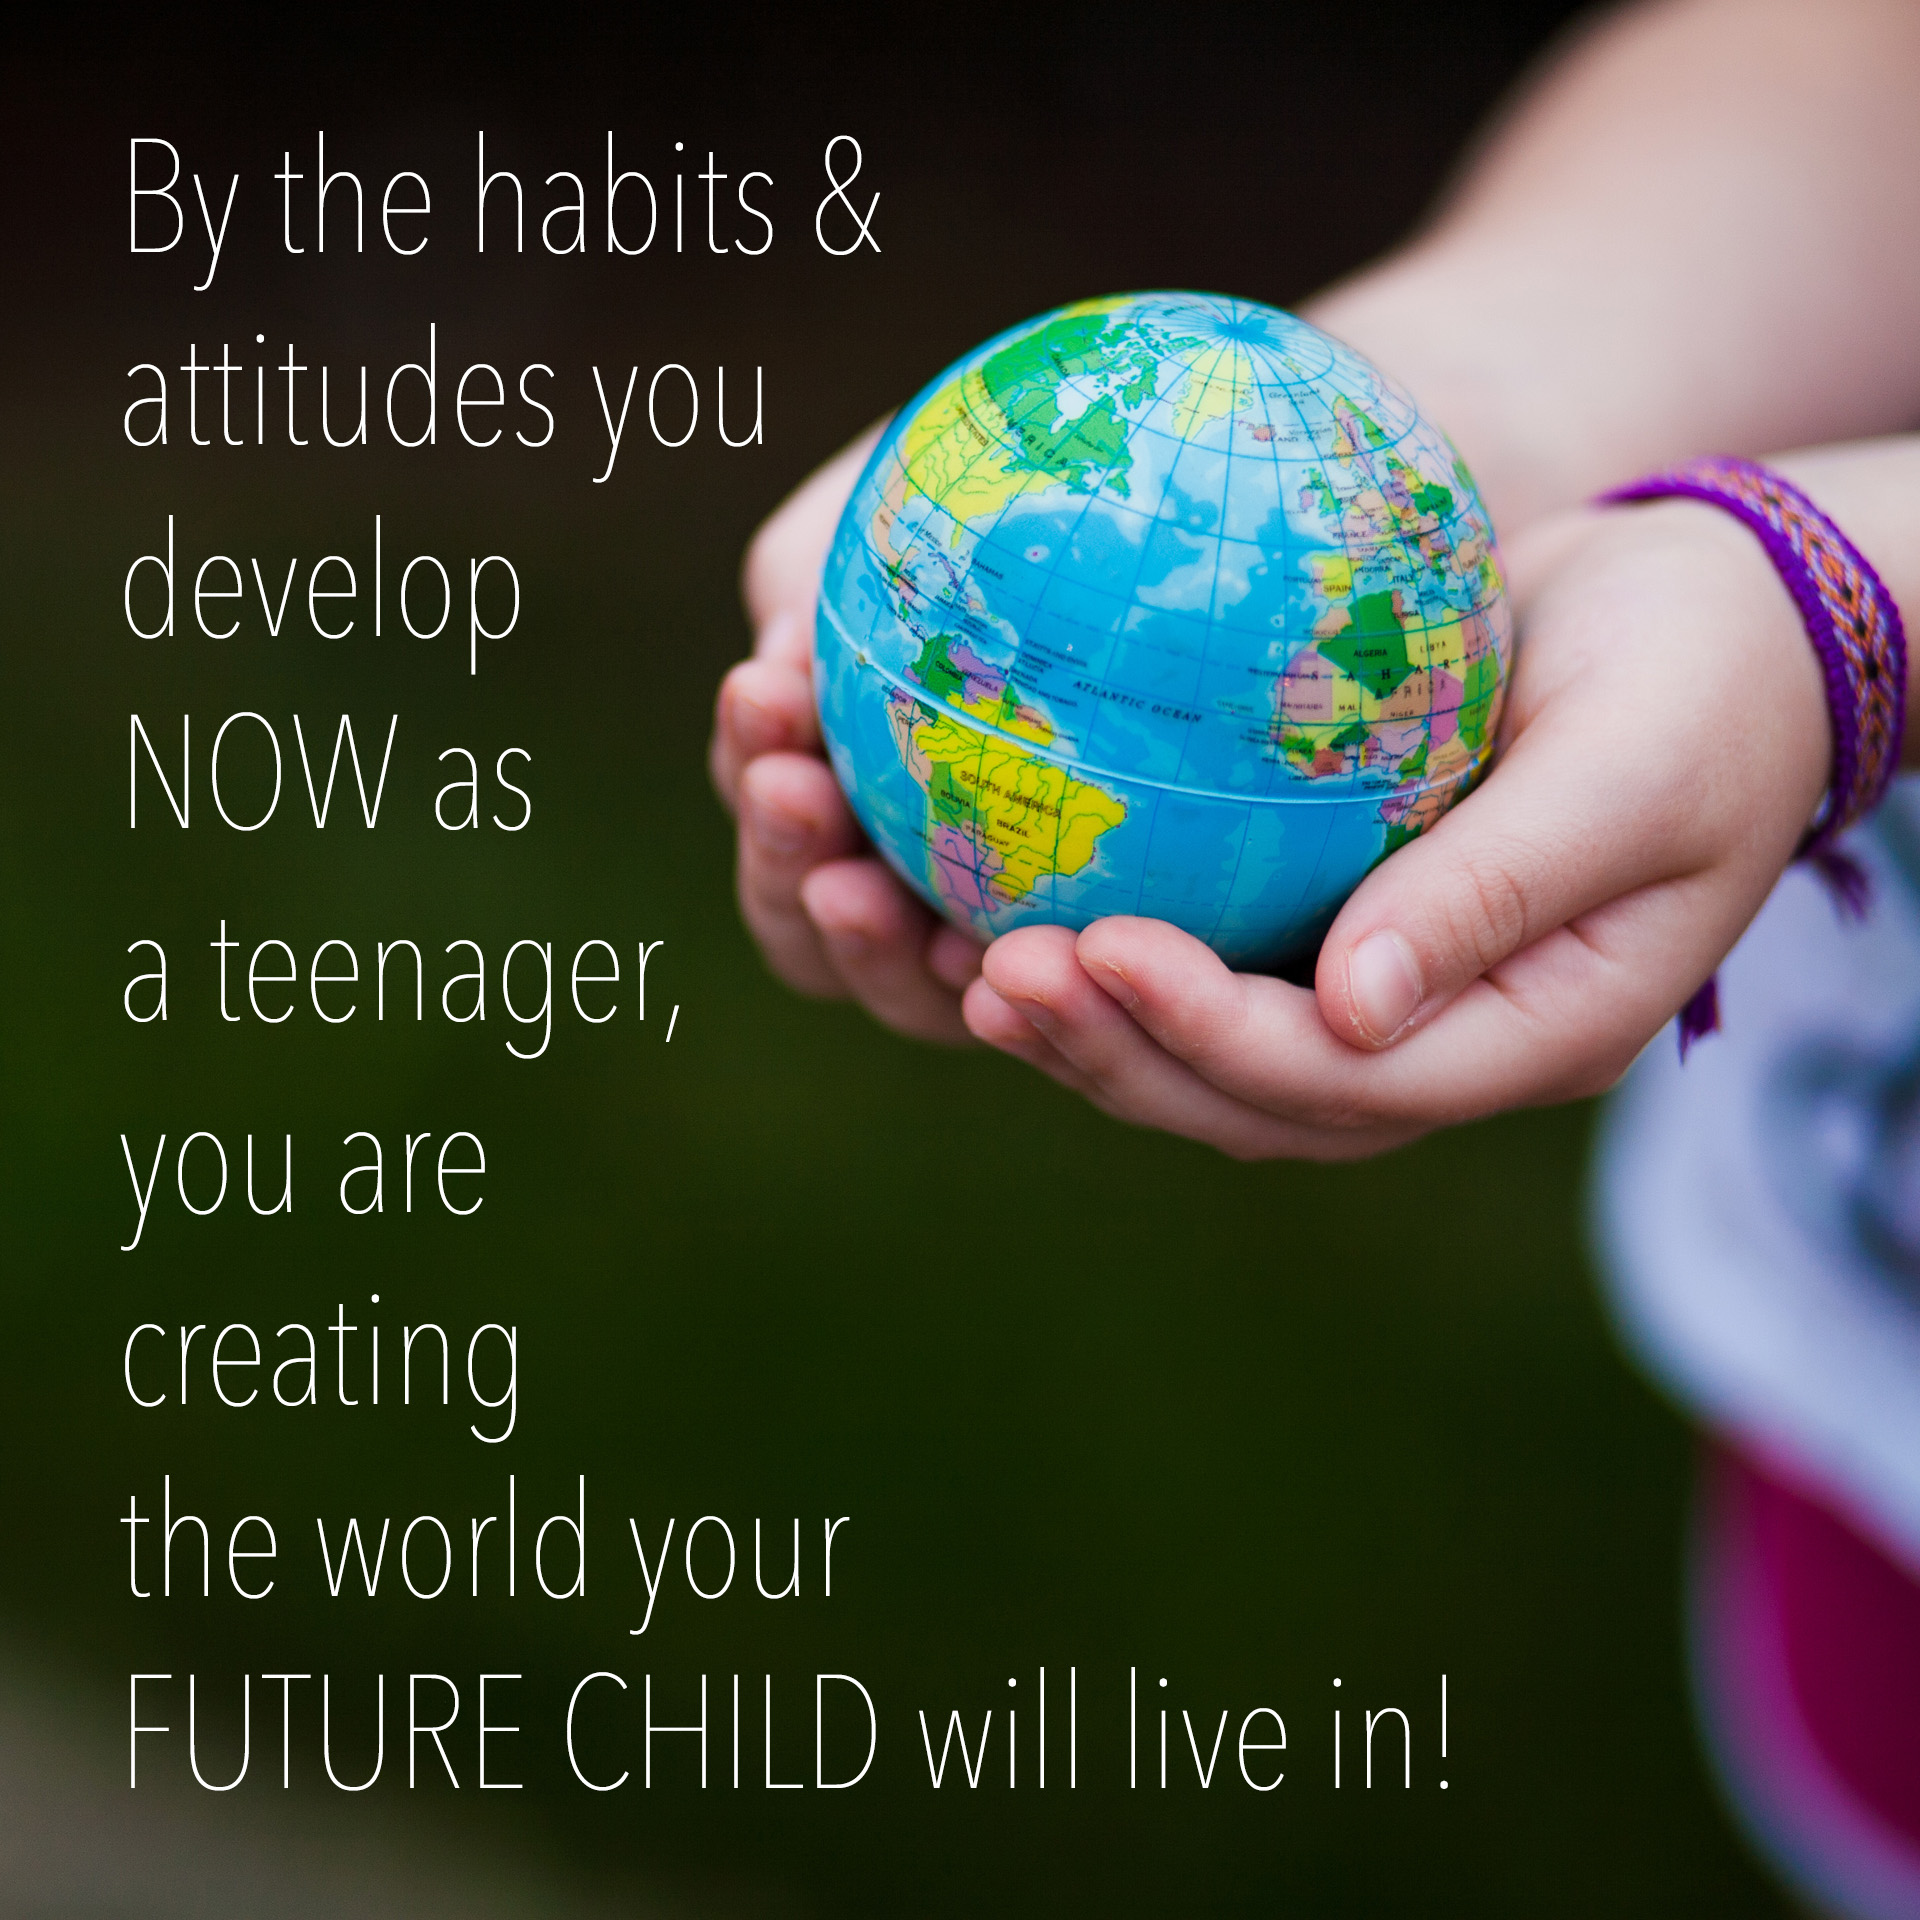 By the habits & attitudes you develop NOW as a teenager, you are creating the world your FUTURE CHILD will live in!